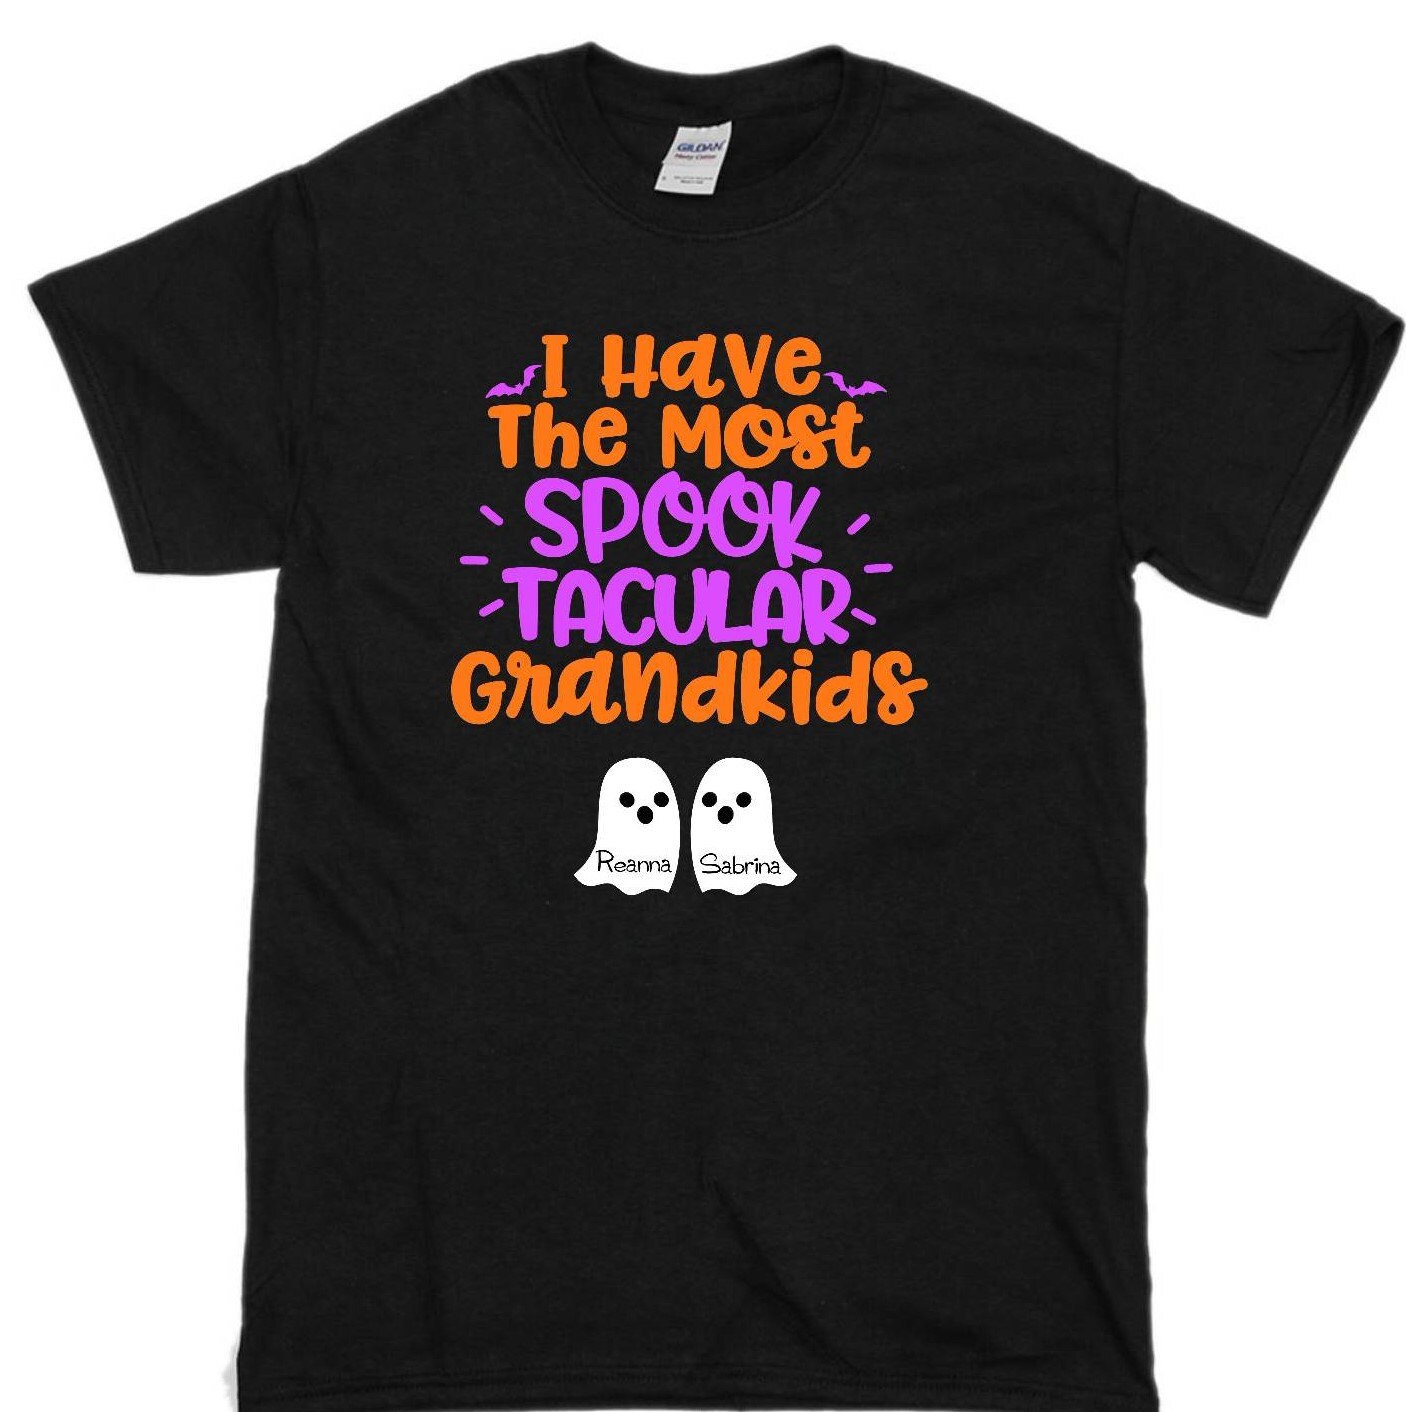 Shirts for Grandparents too!